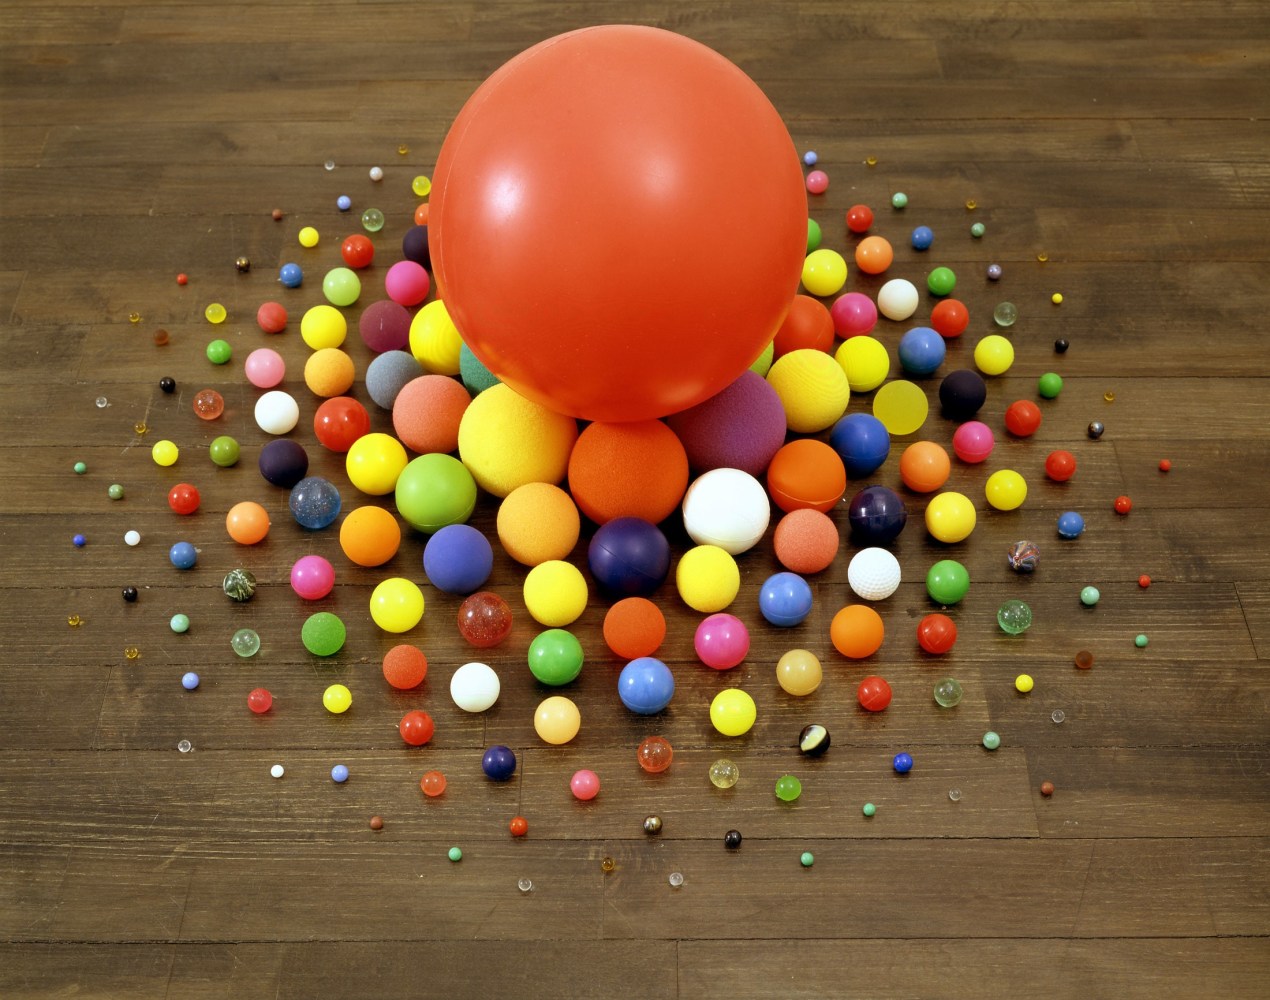 Tom Friedman
Untitled, 1992
Stolen balls
20 x 36 inches
(50.8 x 91.4 cm)
About 200 balls, stolen by the artist over a six-month period